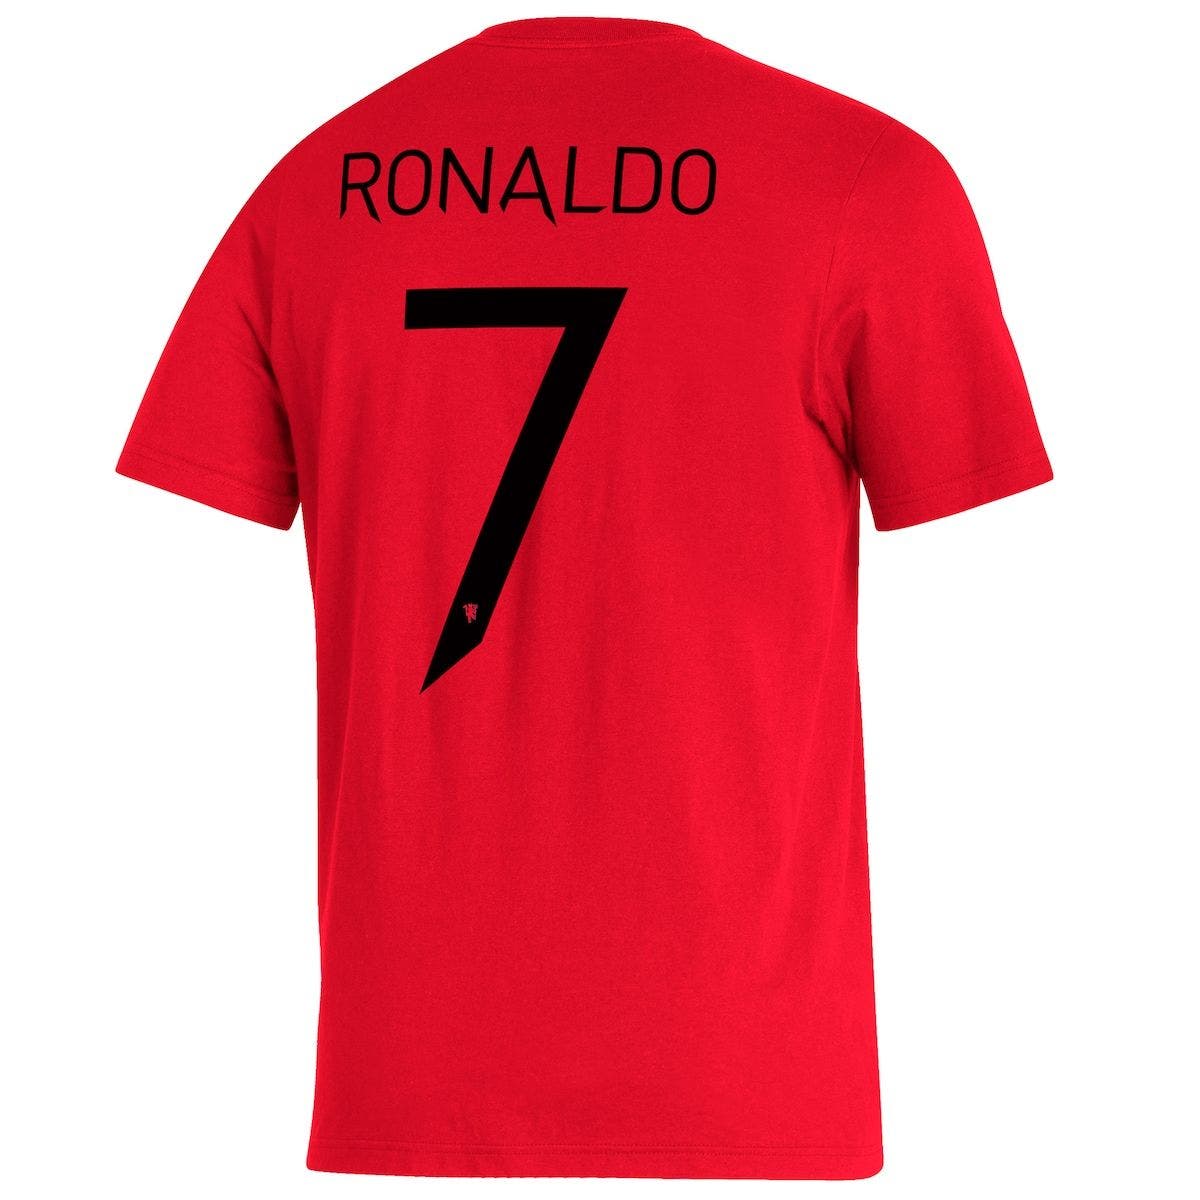 PORTUGAL RONALDO NUMBER 7 S/S RETRO STYLE TEE SHIRT SIZE MEN'S SMALL BRAND NEW 